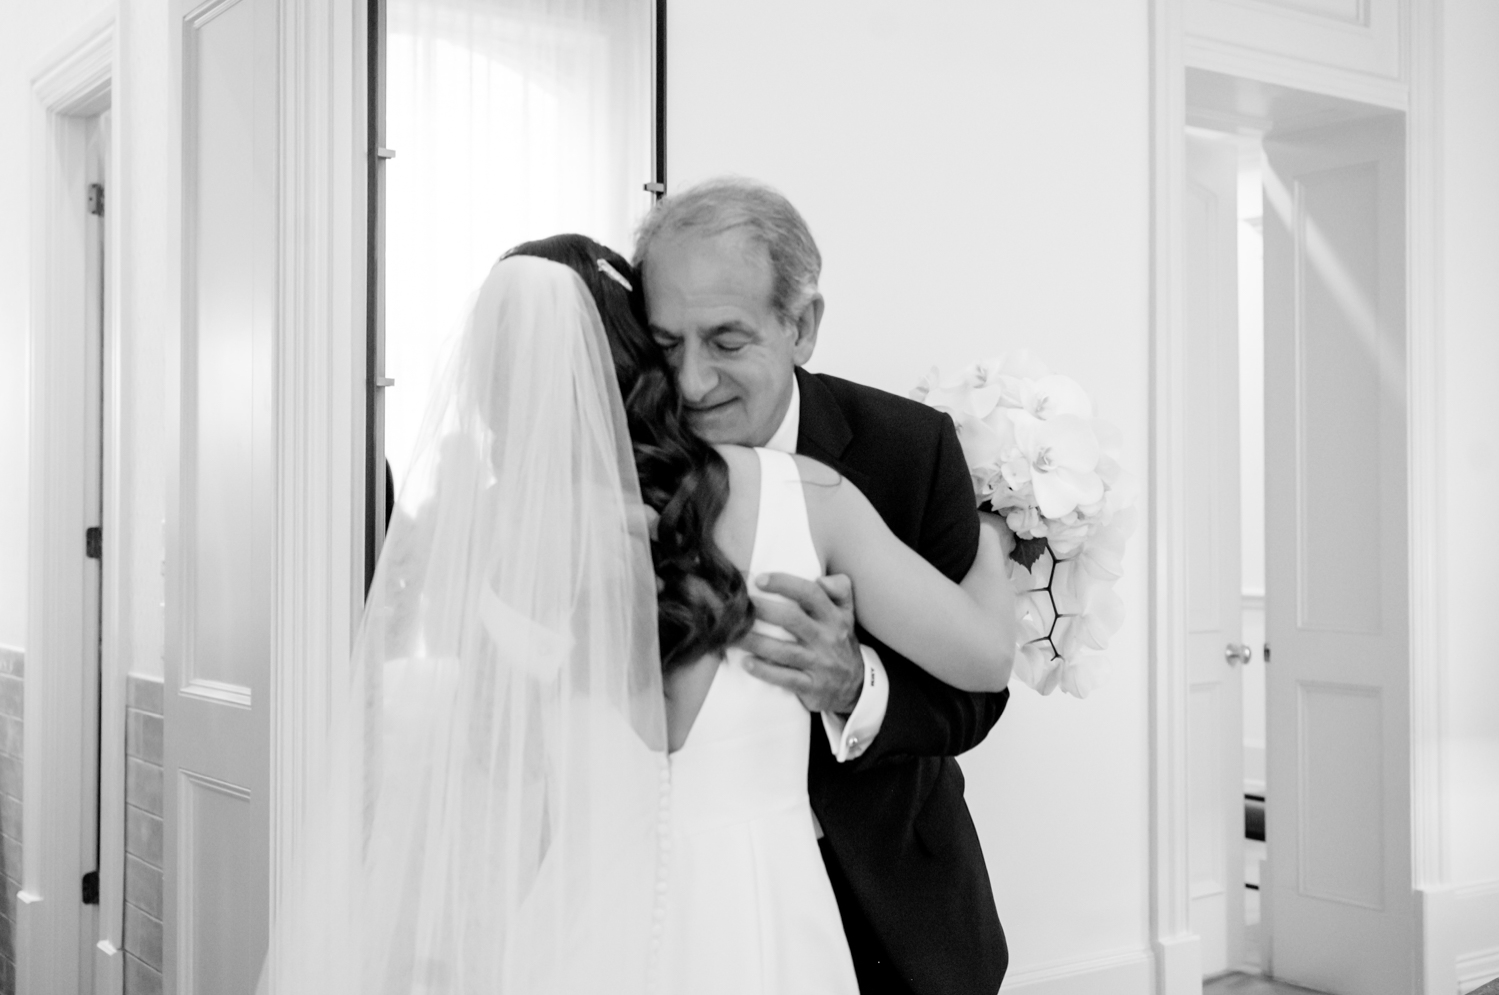 The bride hugs her father after he sees her in her dress for the first time.